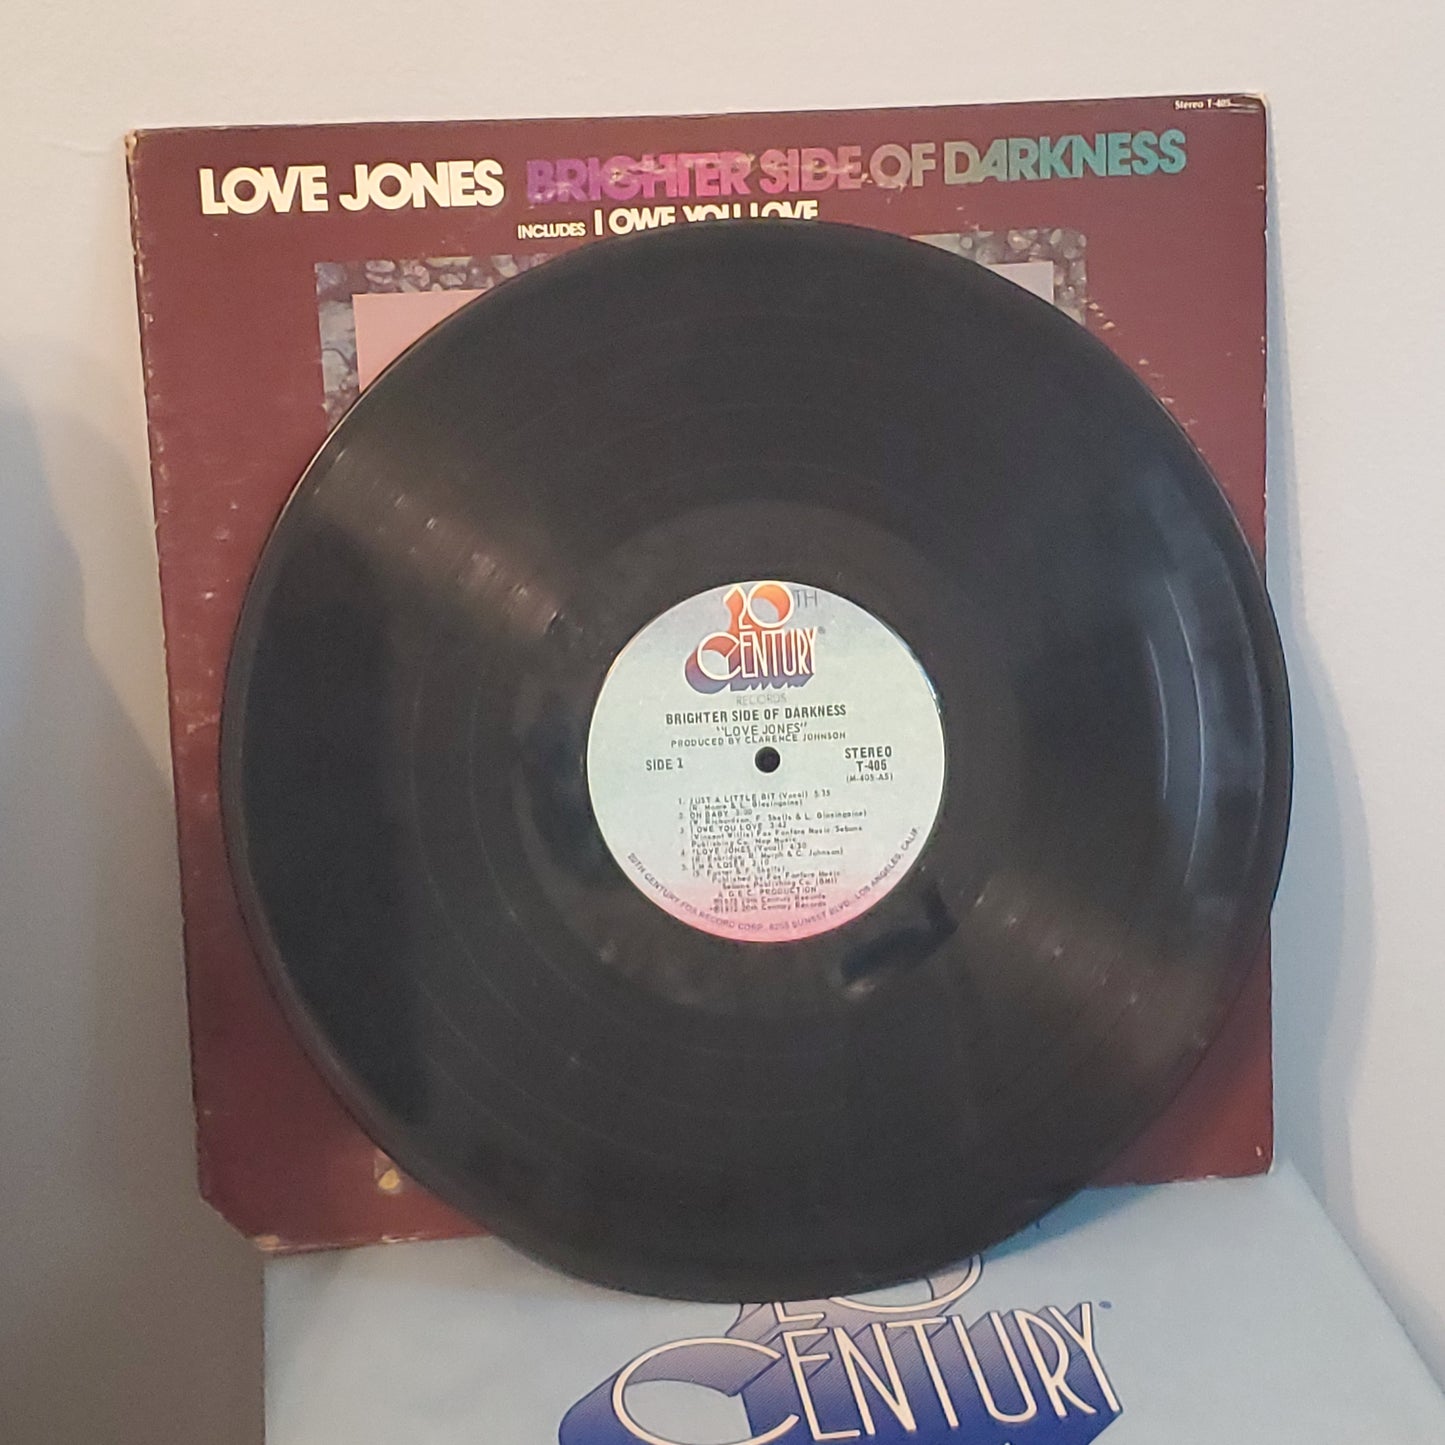 Love Jones Brighter Side of Darkness By 20th Century Records